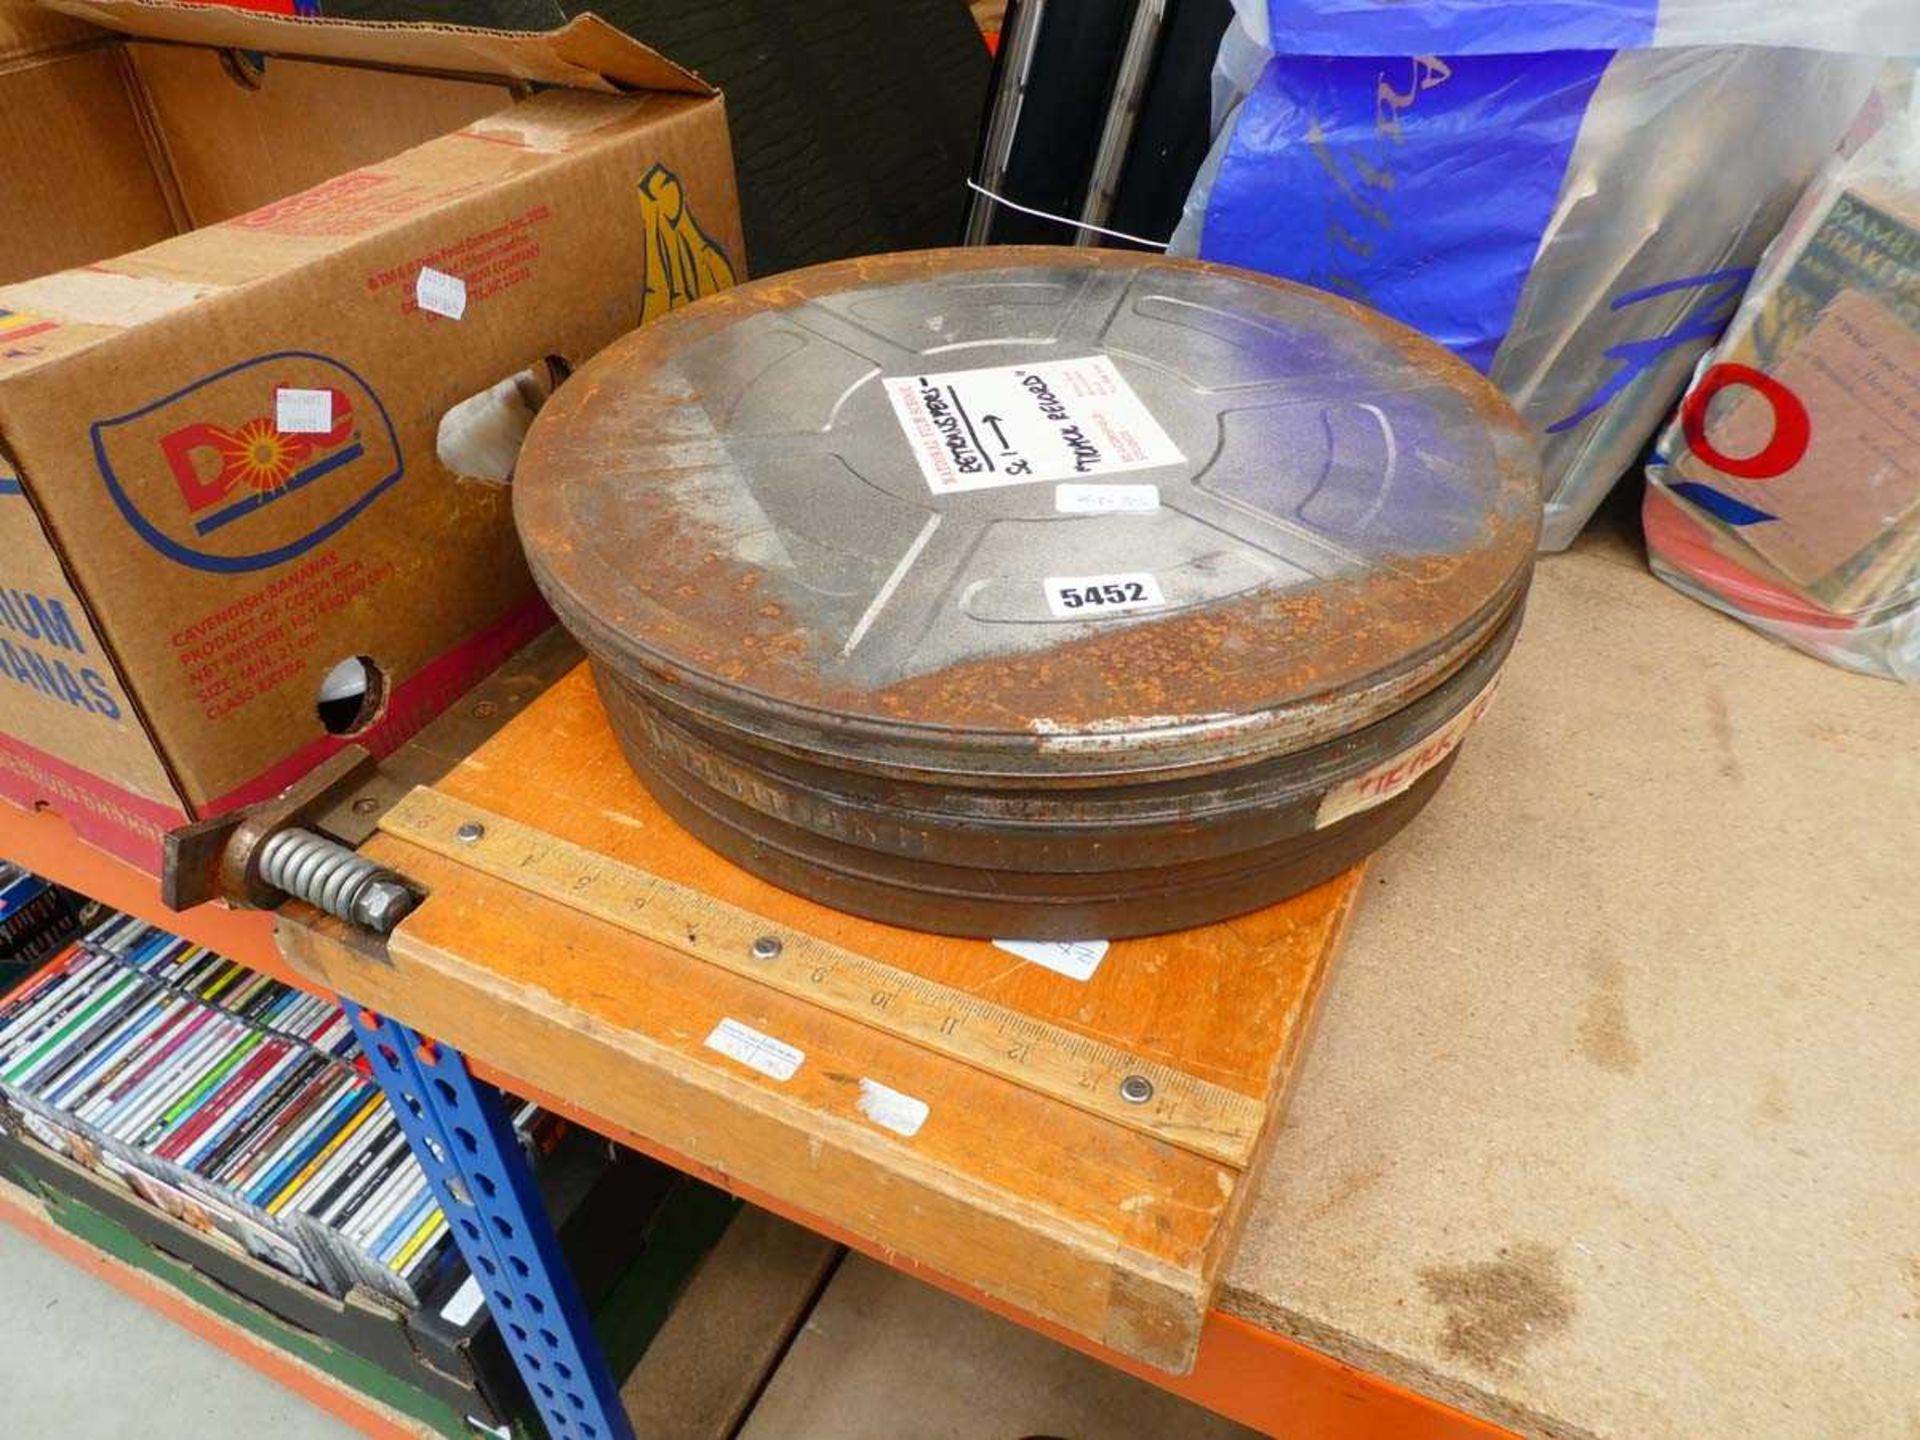 2 film reel canisters and a guillotine